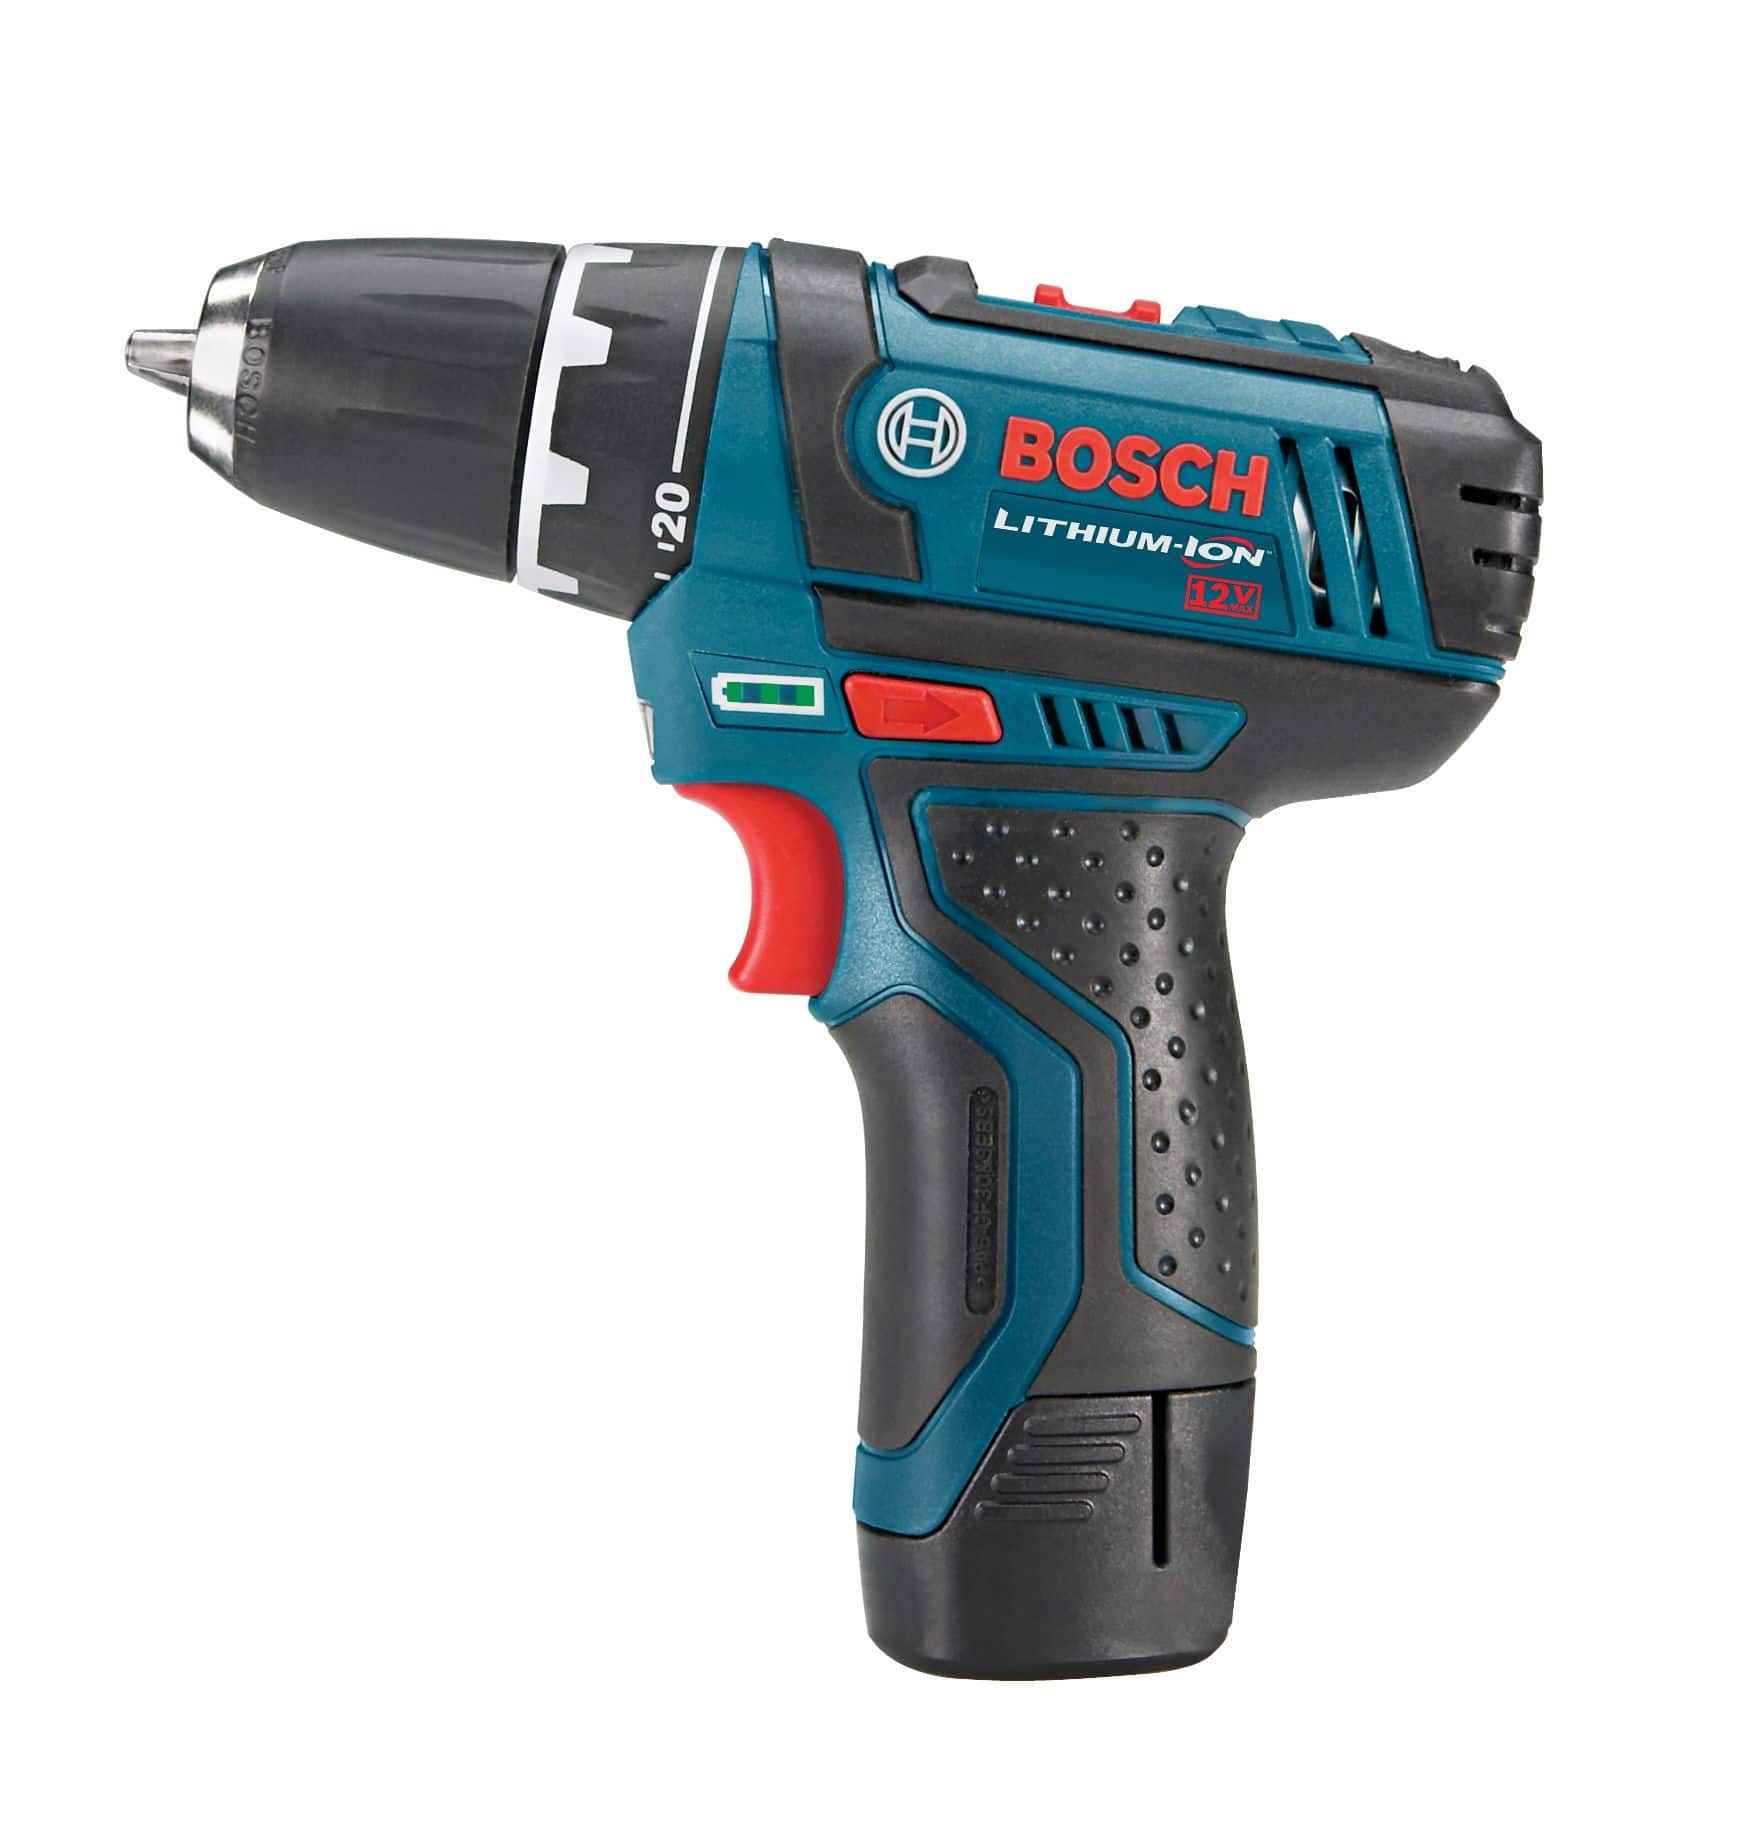 Bosch PS31-2A 12V Max Lithium-Ion Cordless Drill/Driver with